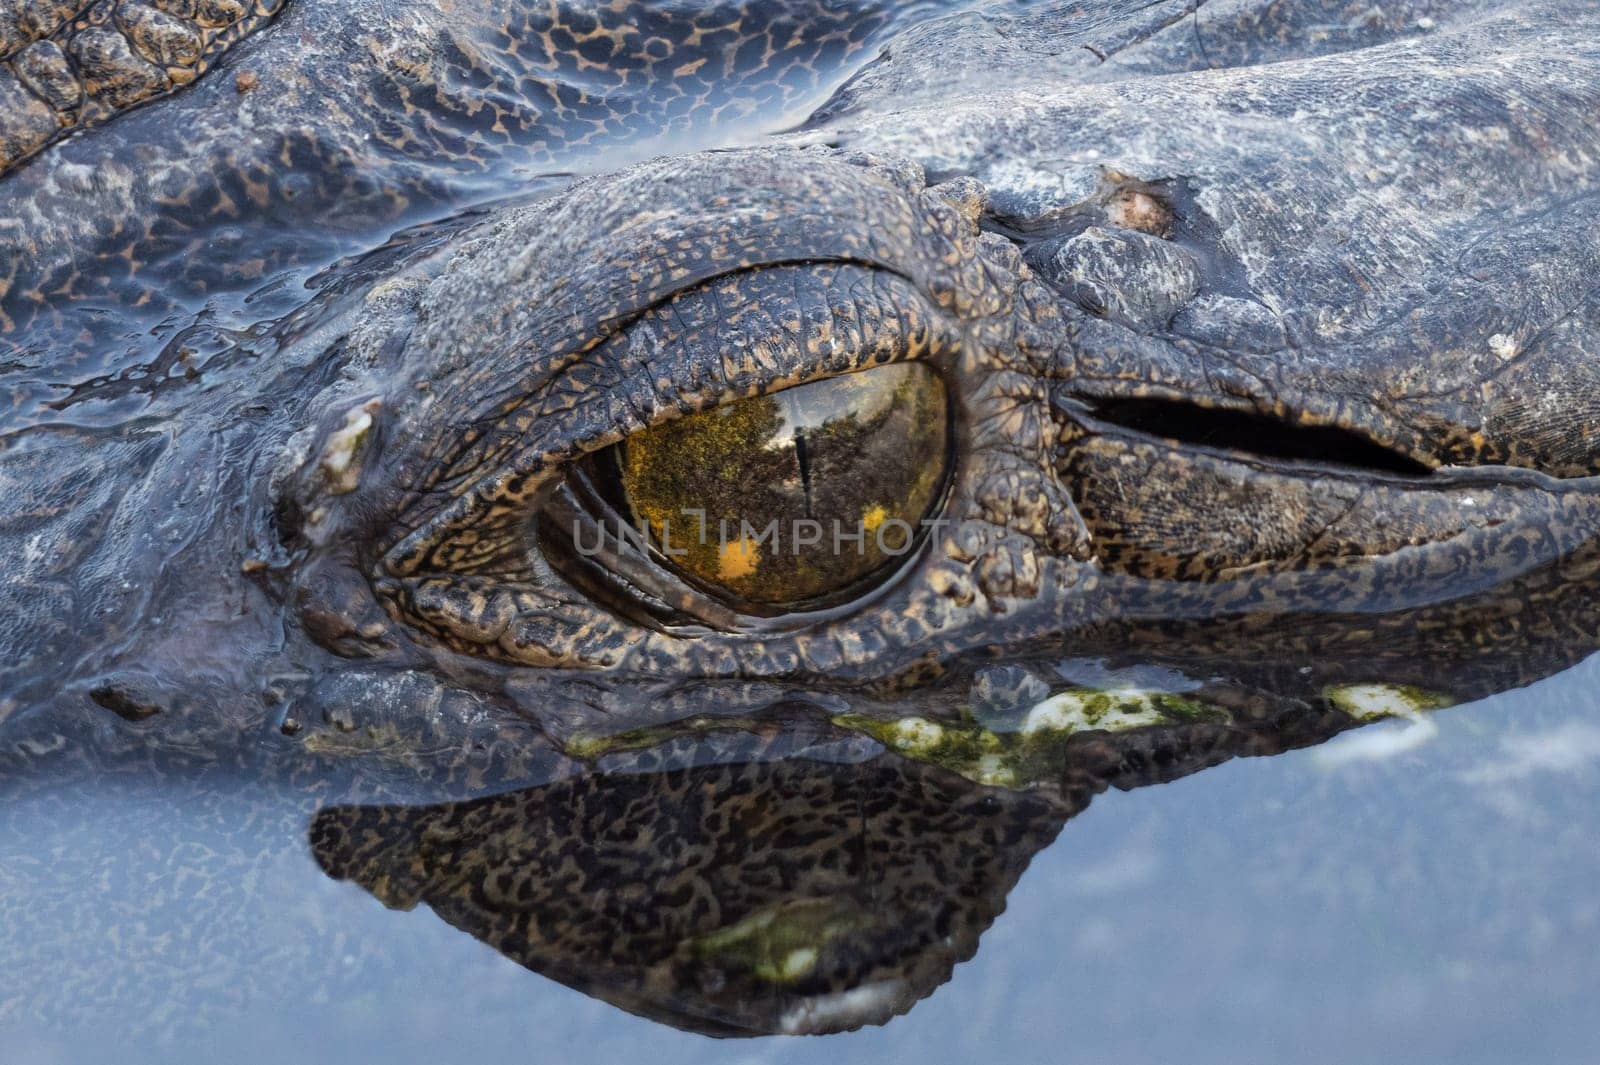 Portrait shot of a wild freshie croc in the water, with a focus on its wet scales and eye with reflection in water.